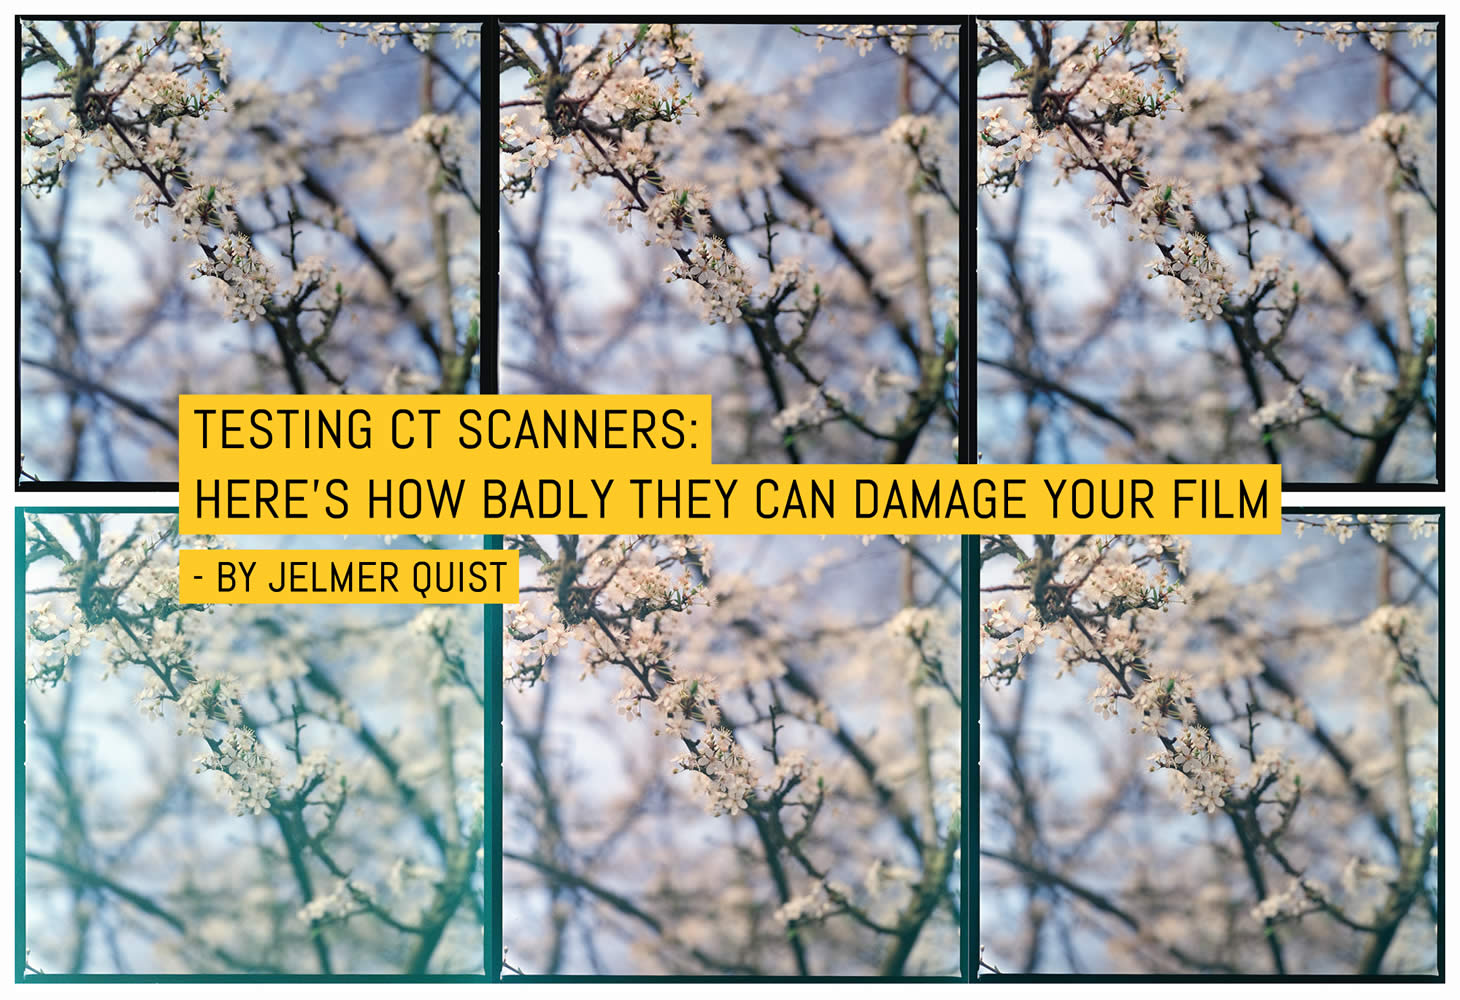 Testing CT Scanners: Here’s how badly they can damage your photographic film